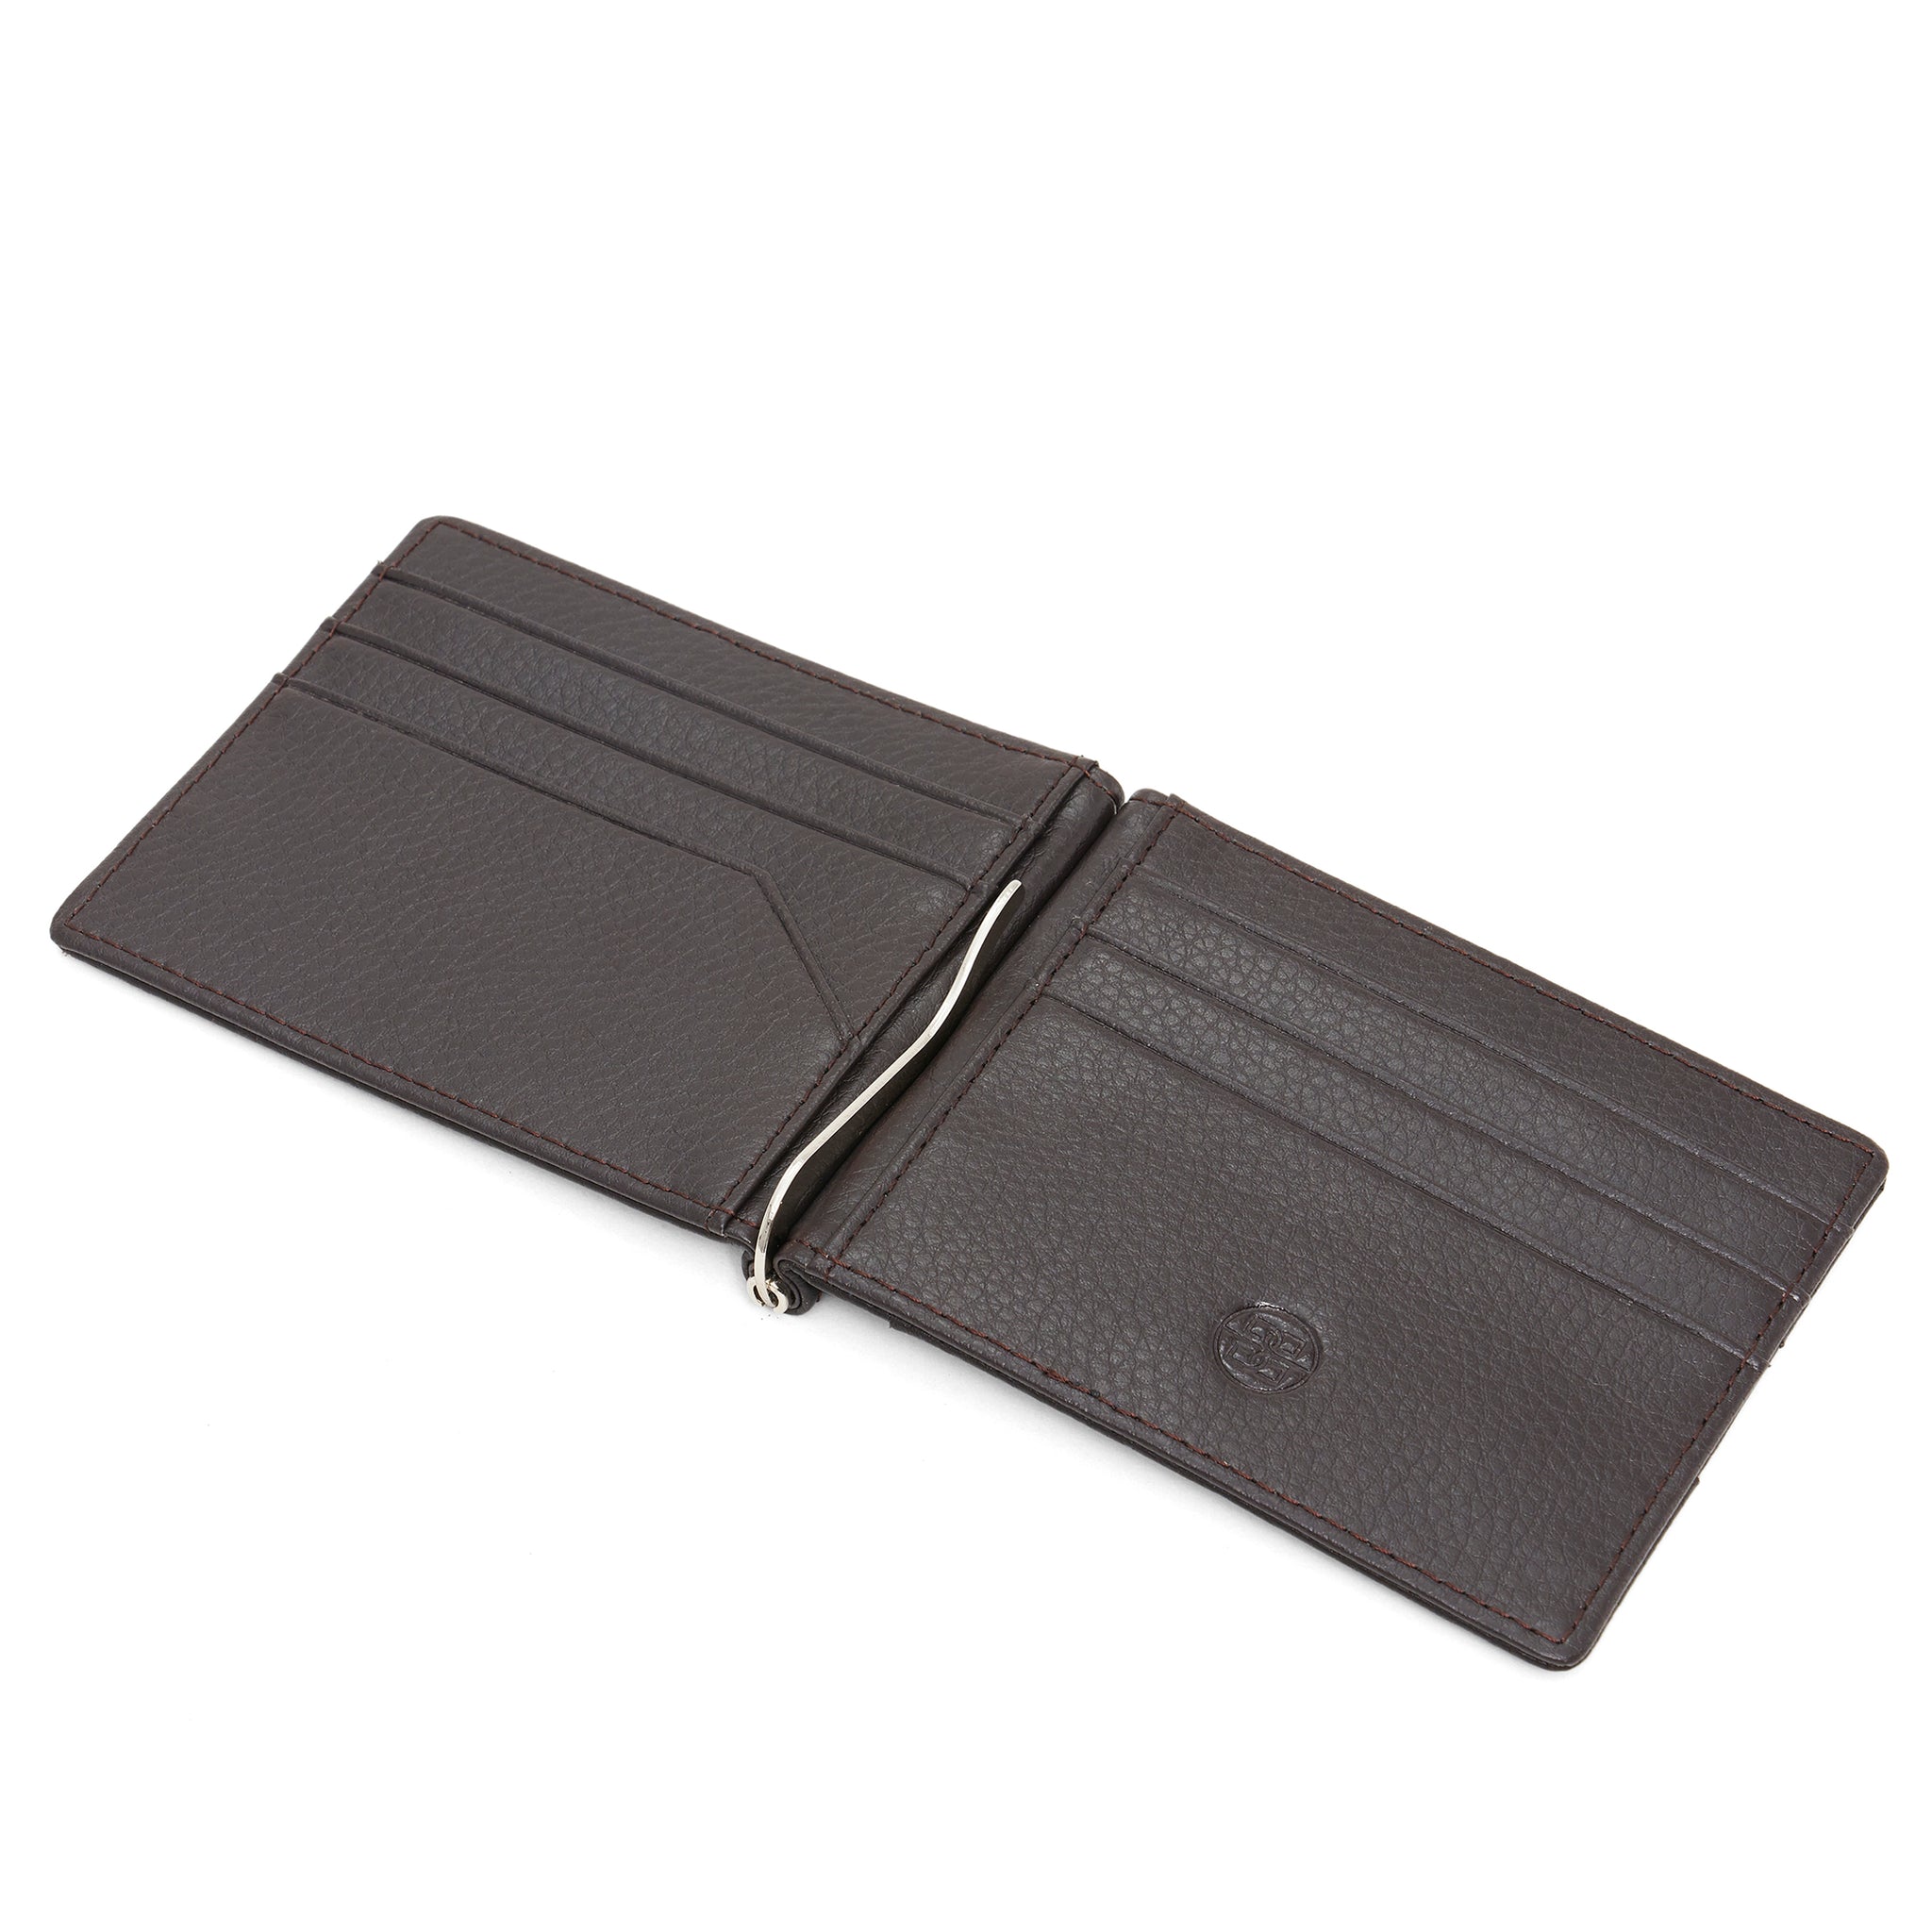 Bolvaint - The Wainwright Wallet with Money Clip